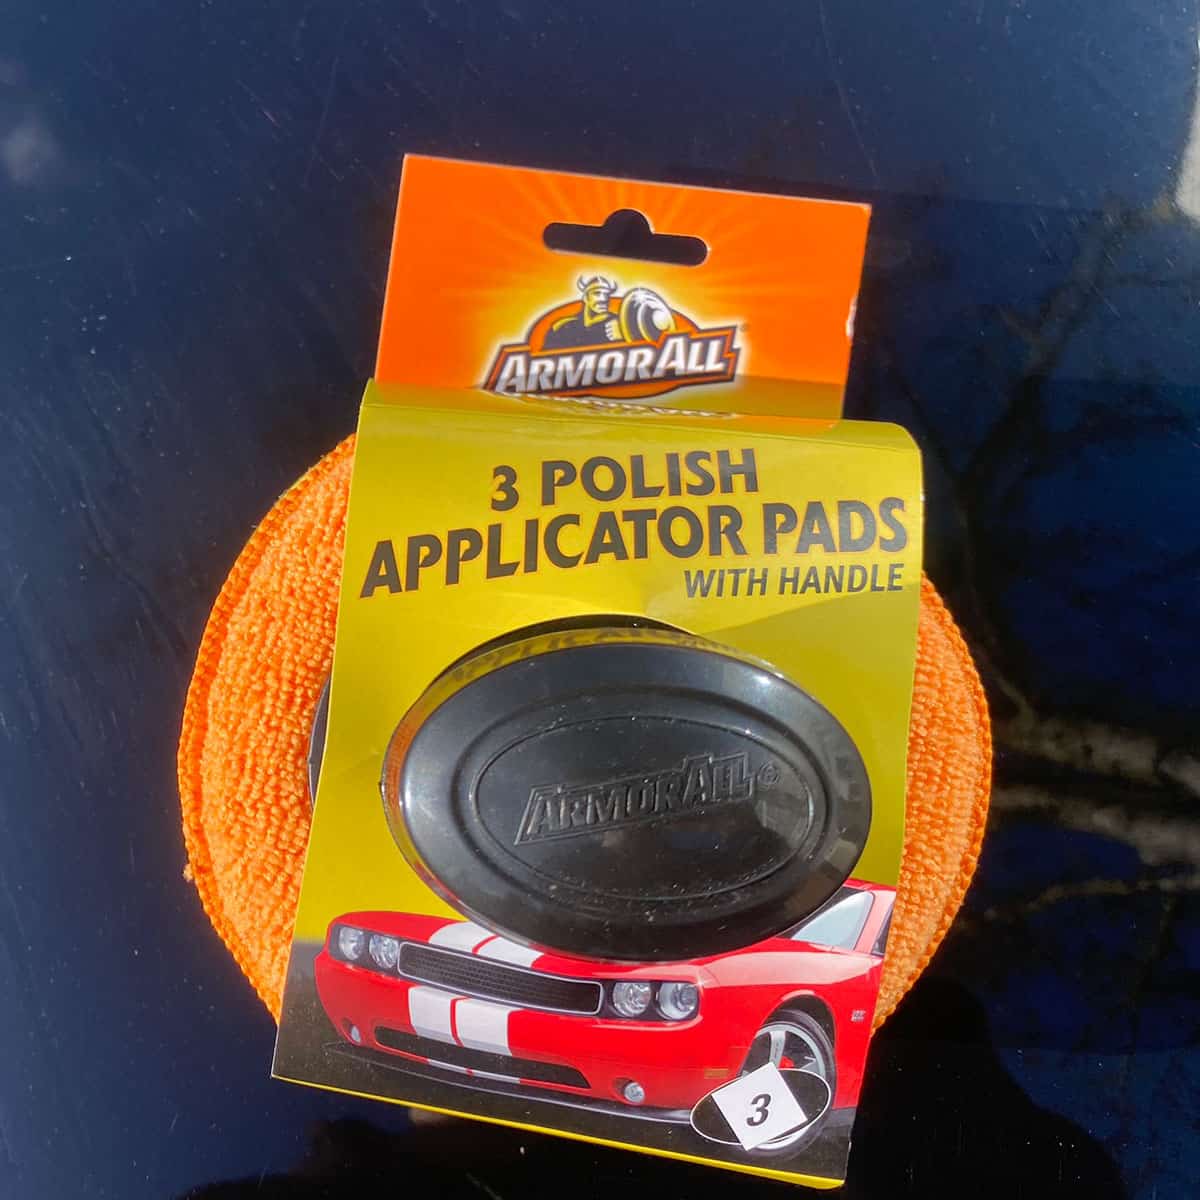 Armor All 3 Polish Applicator Pads with Handle 2Get the sparkling finish you've been looking for! This three pack of wax & buffing pads includes everything you need to give your car a deep high shine & sparkling paintwork.